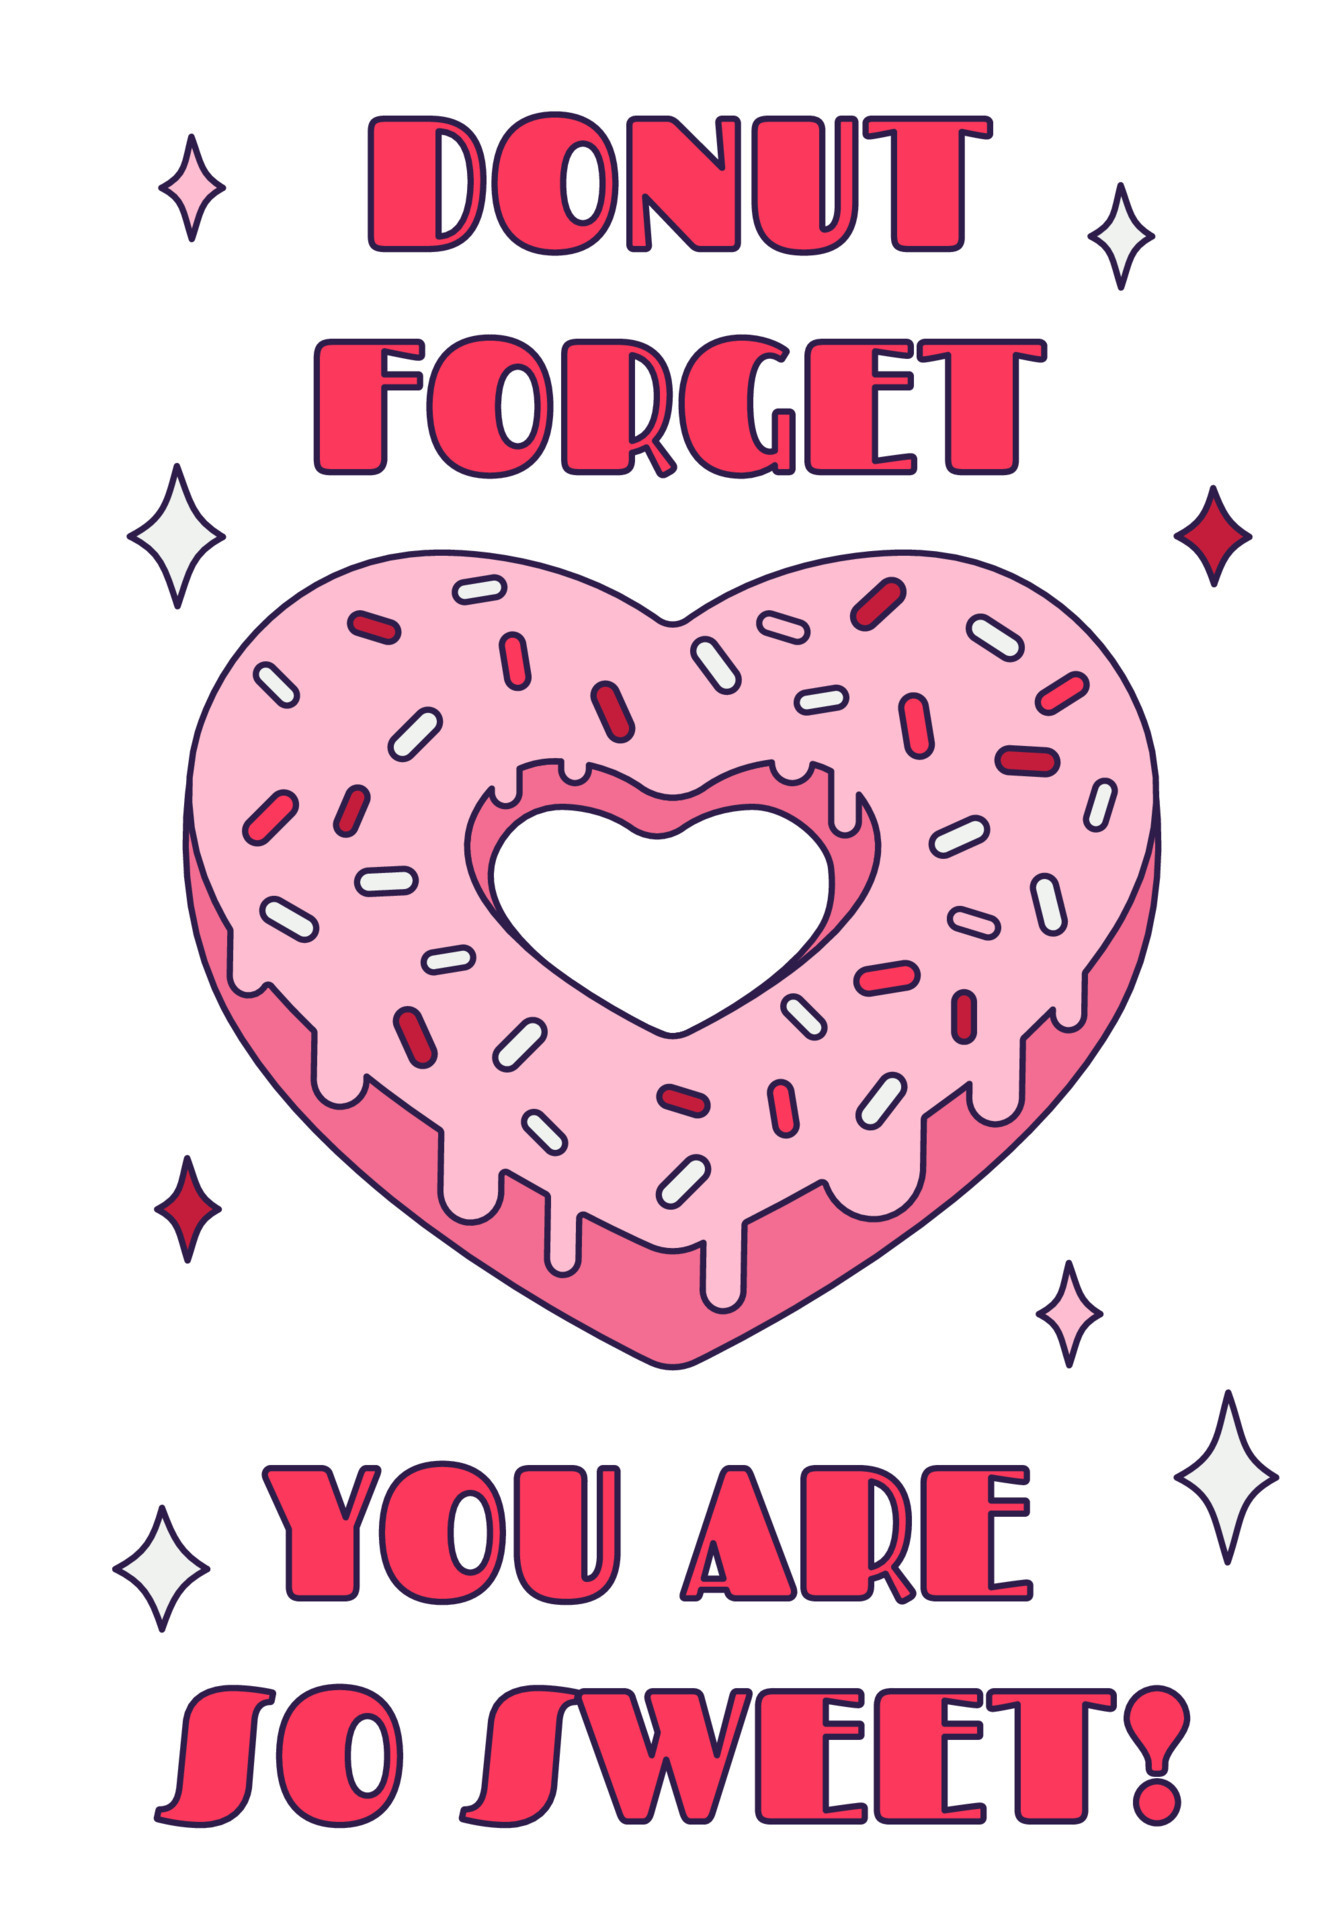 Cute Valentine Day donut heart with pun quote - ''Donut forget you are so  sweet'' in retro cartoon style. Love vector illustration for favor tags,  postcards, greeting cards, posters, or banners. 15400956